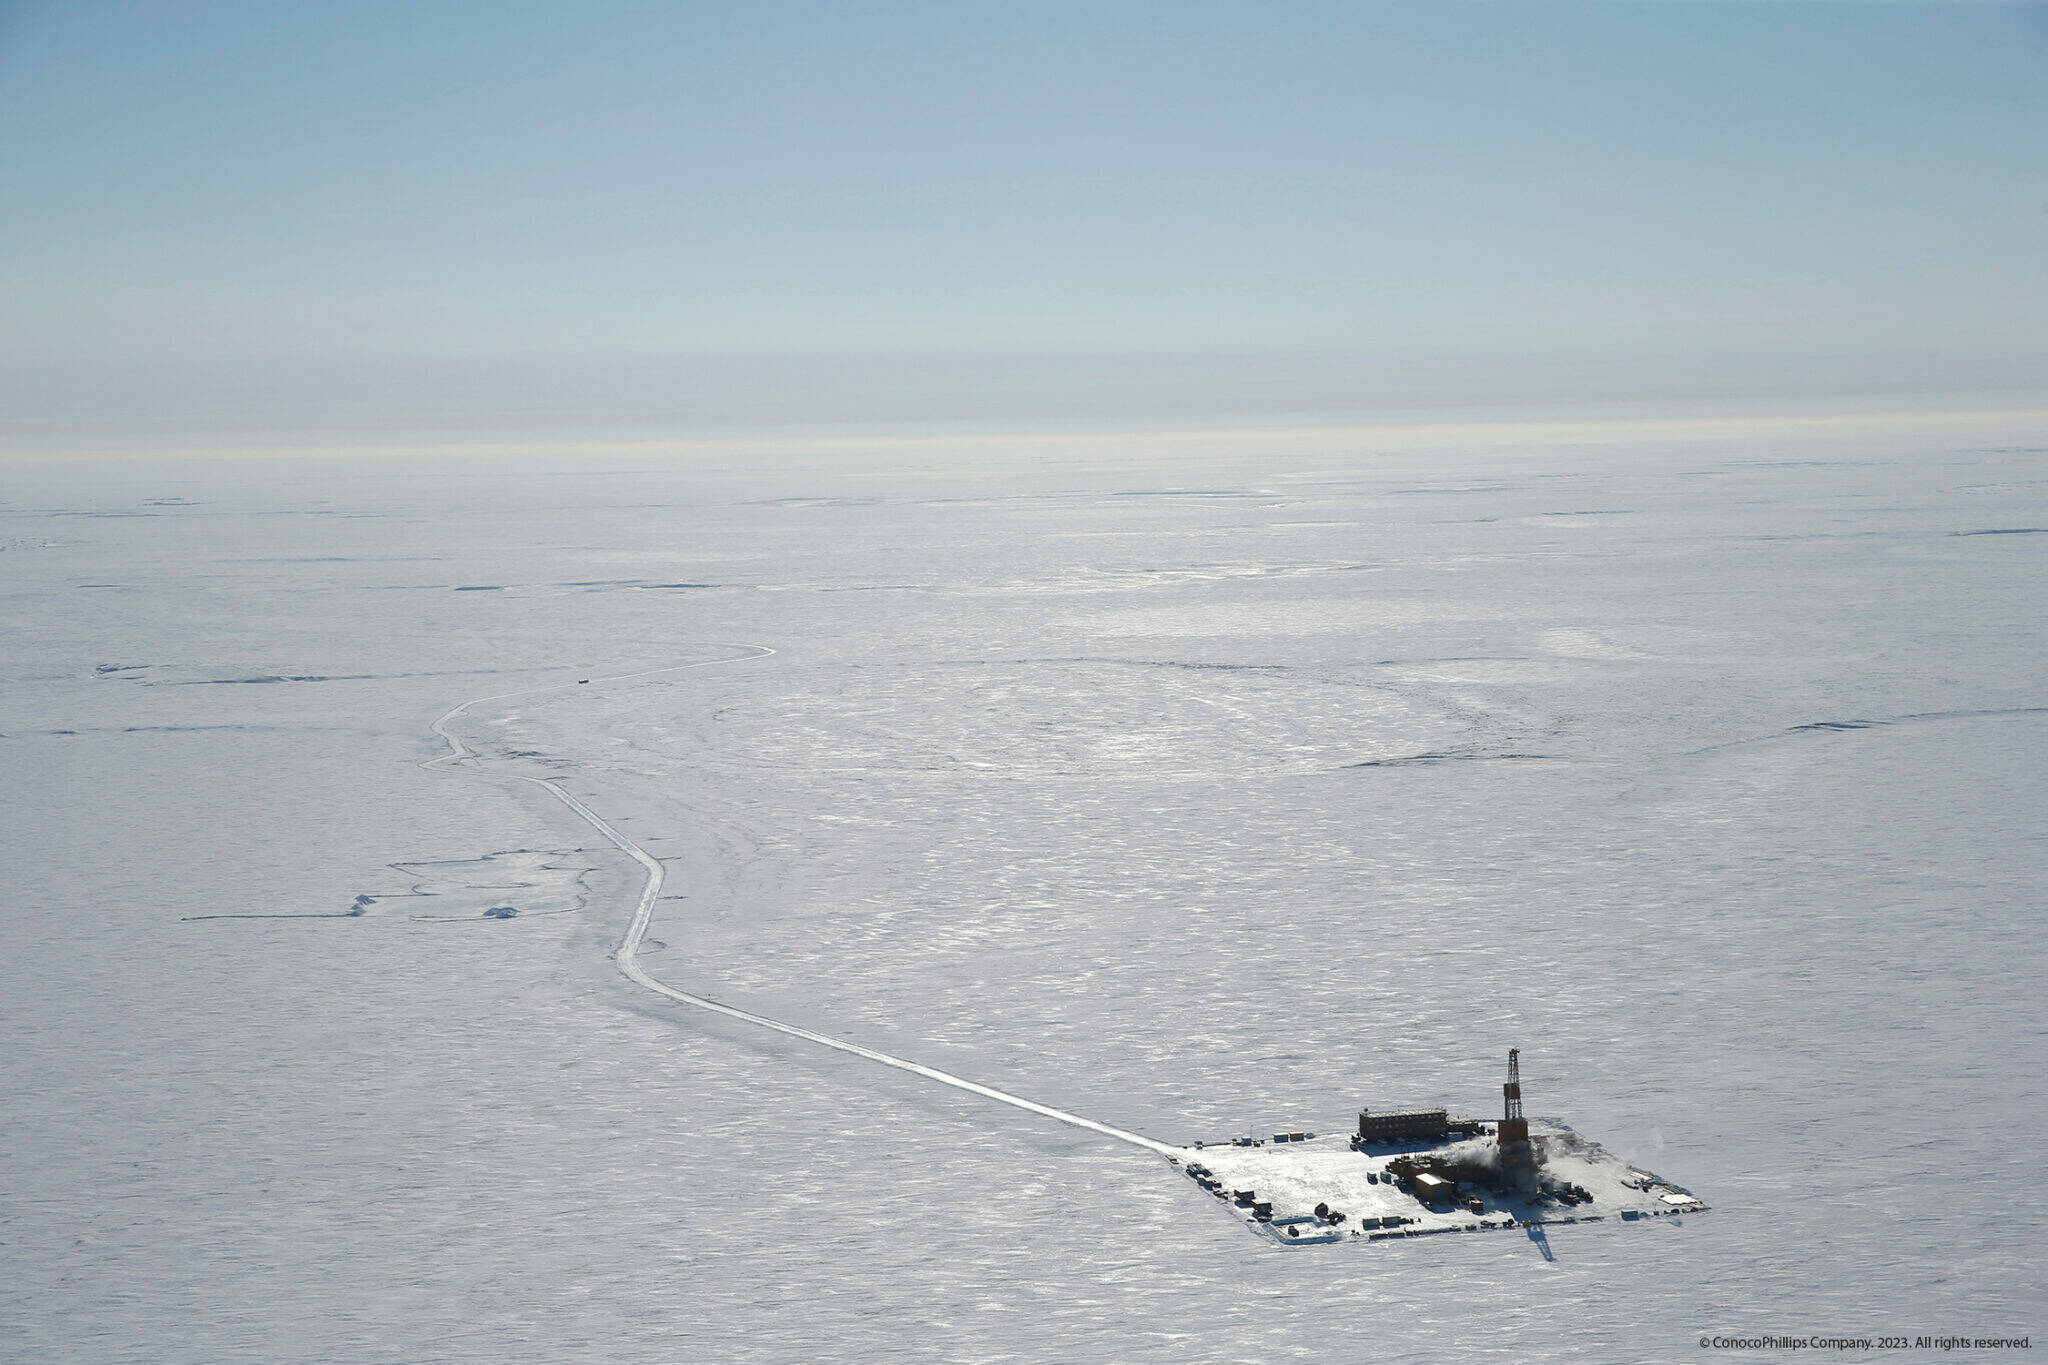 An exploration site at ConocoPhillips’ Willow prospect is seen from the air in the 2019 winter season. Willow is located in the National Petroleum Reserve in Alaska. (Photo by Judy Patrick/provided by ConocoPhillips Alaska Inc.)